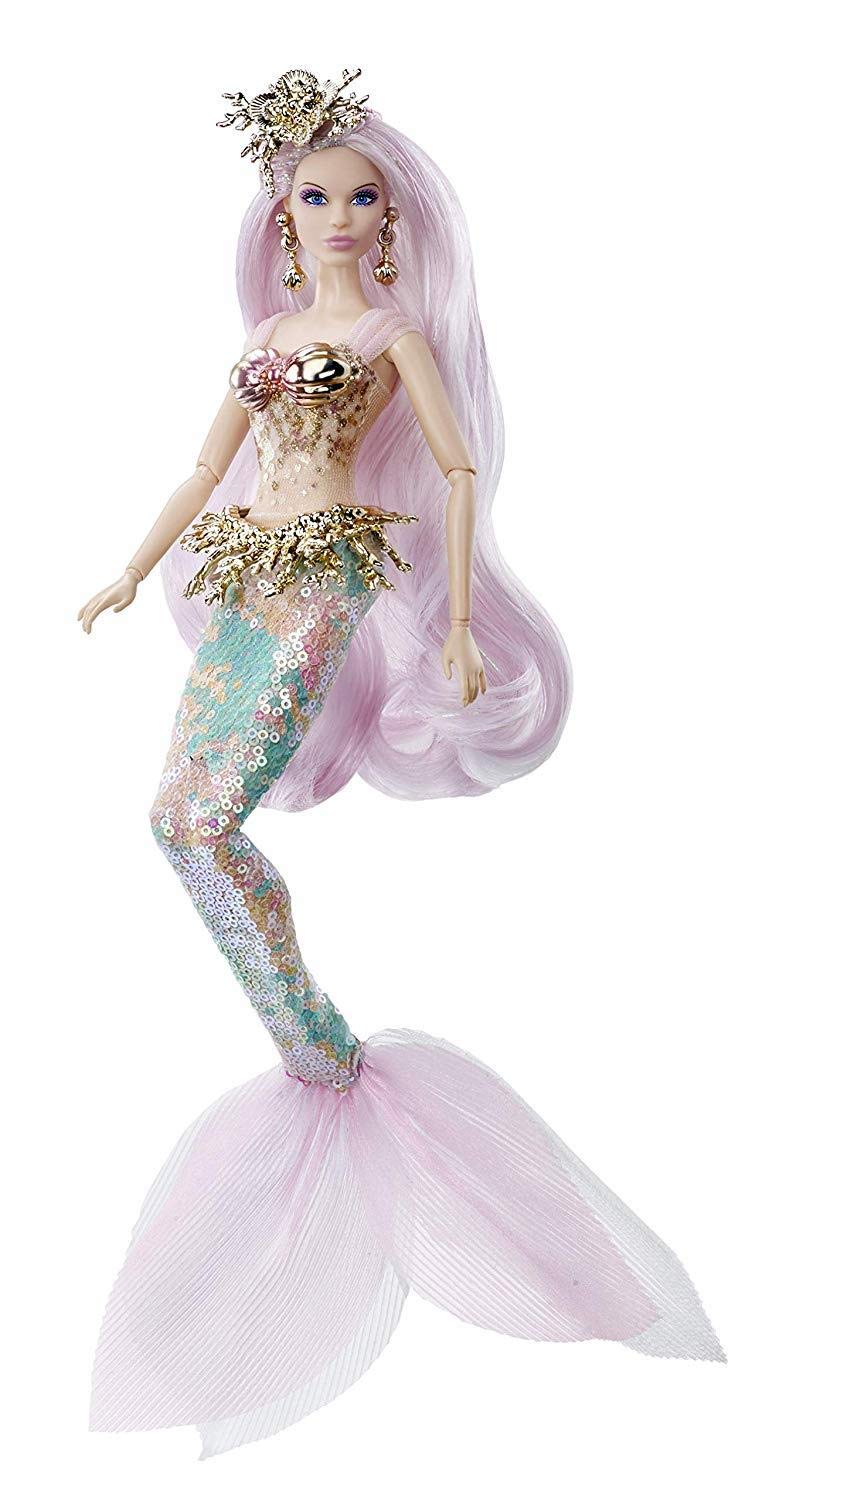  Barbie the Dragon Empress collector doll is out. Stock images and links